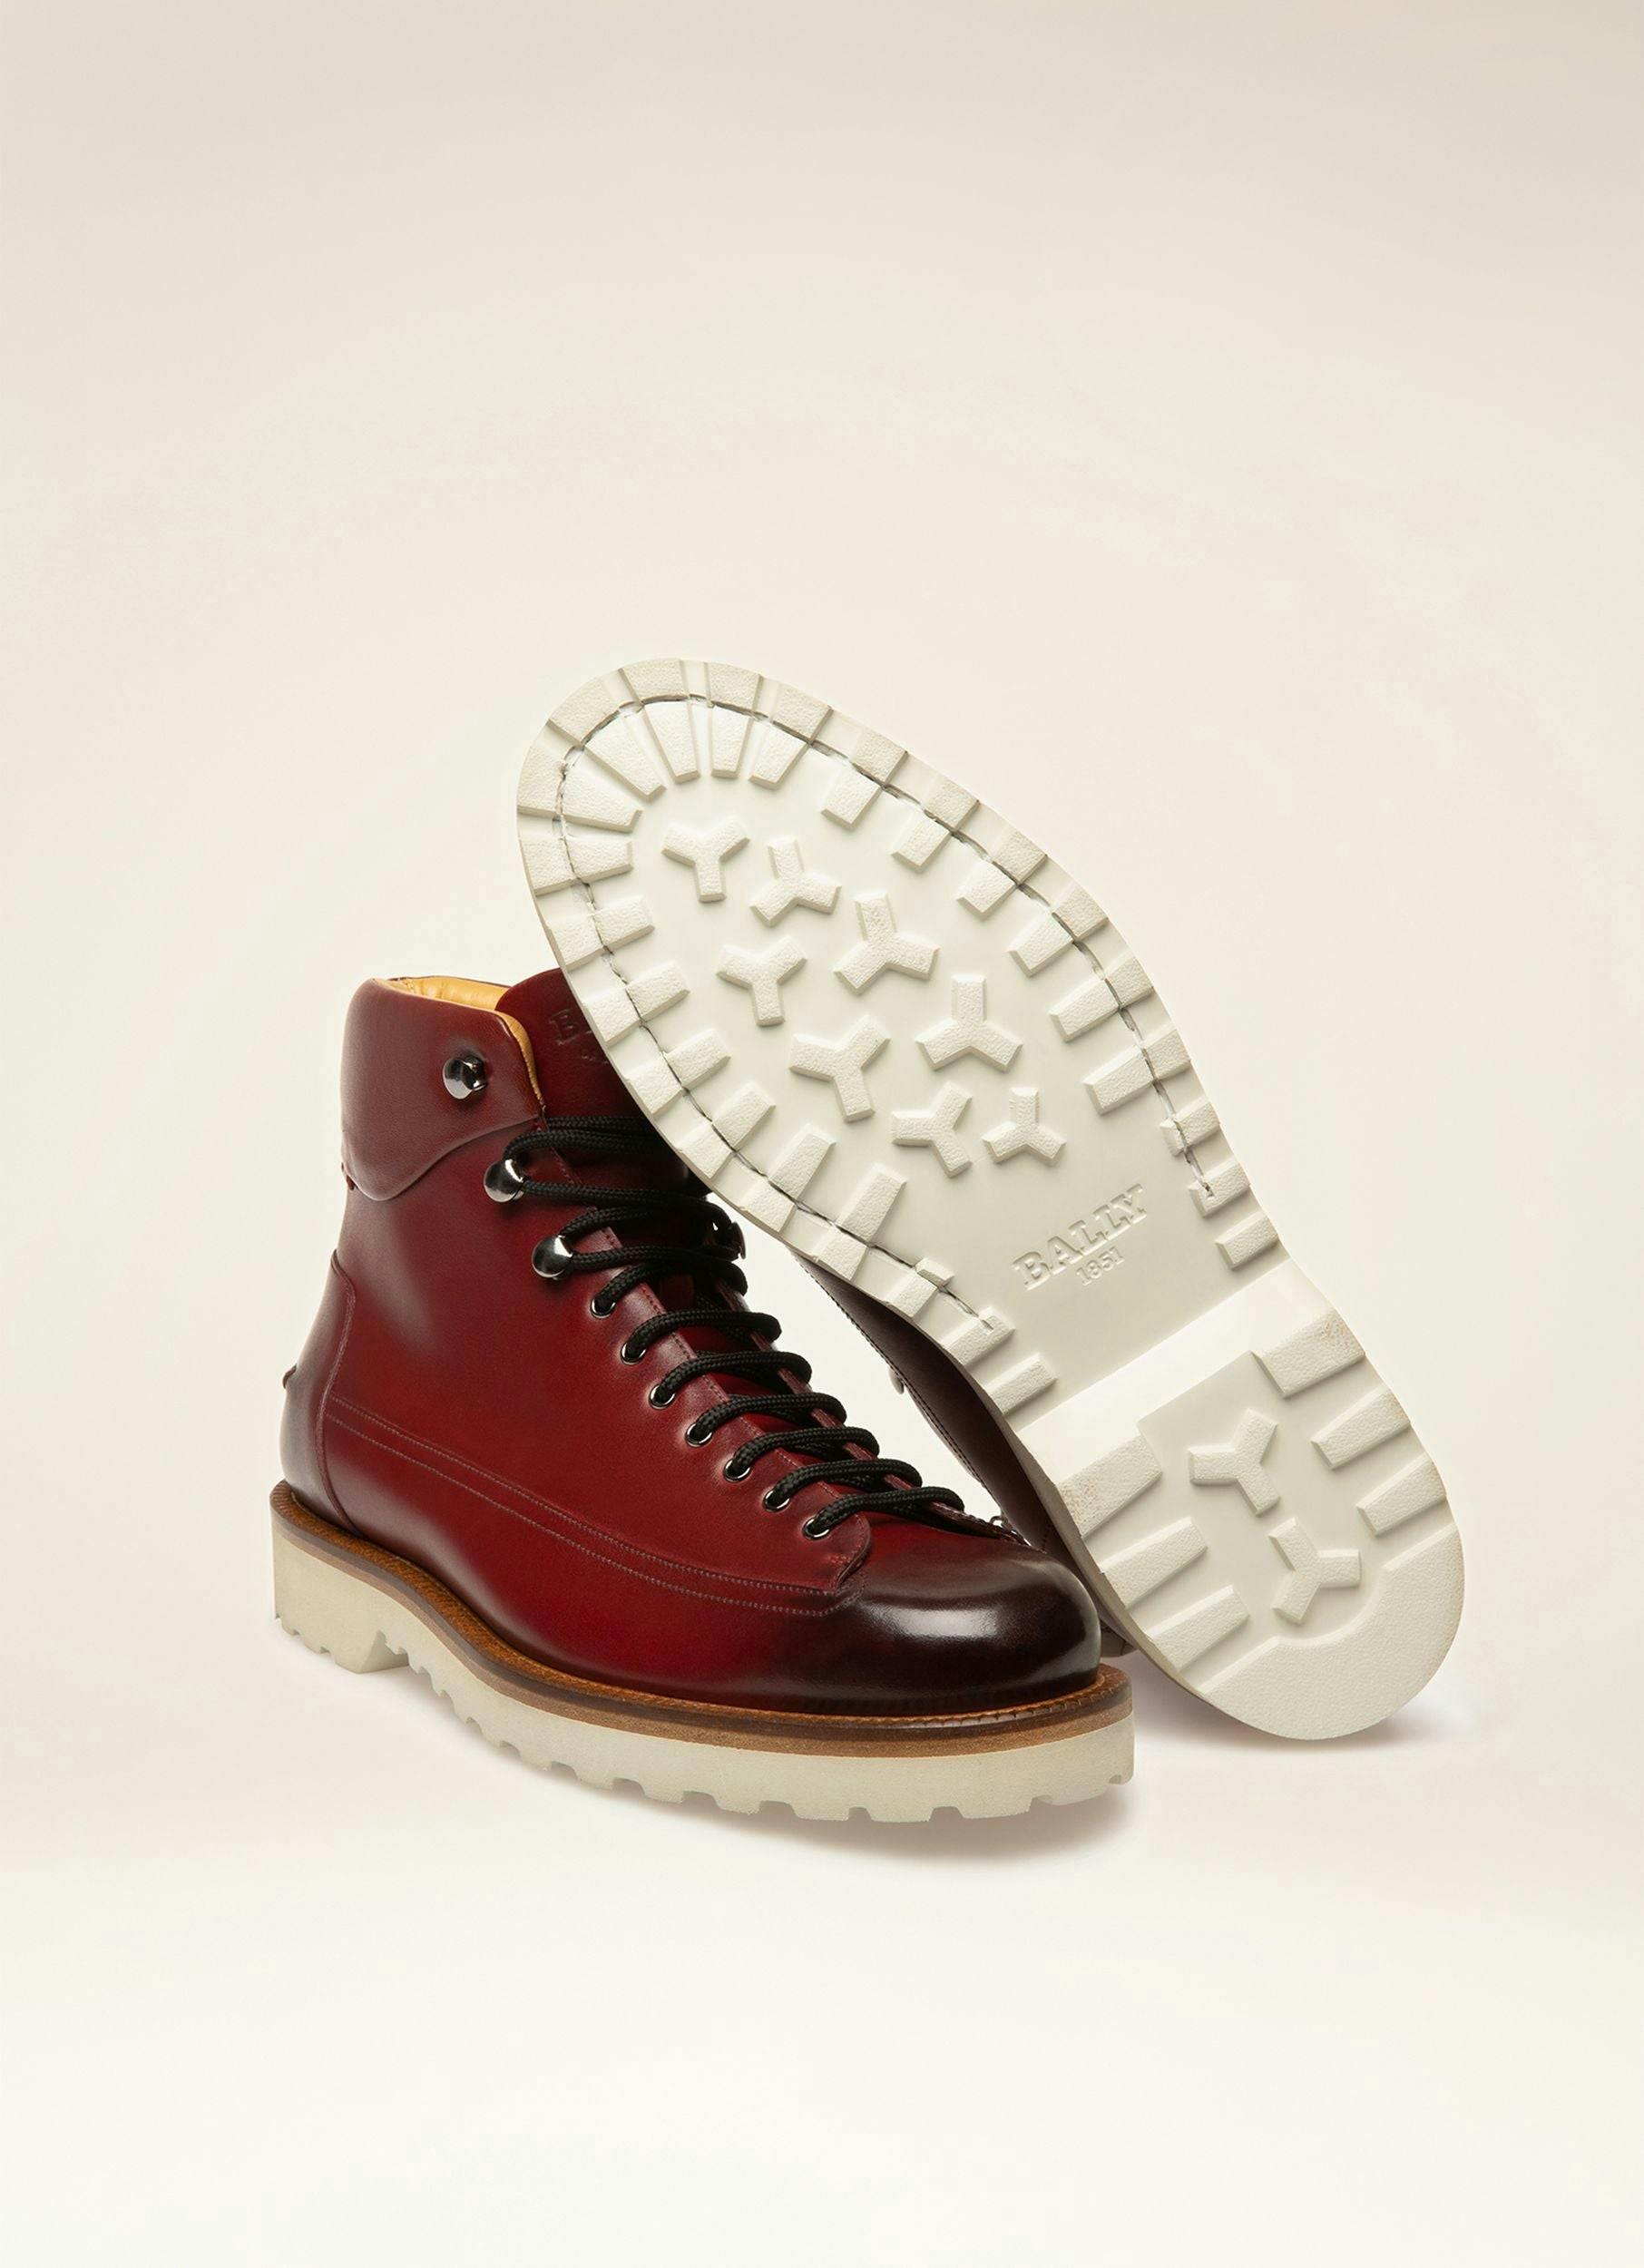 NOTTINGHAM Leather Boots In Heritage Red - Men's - Bally - 07